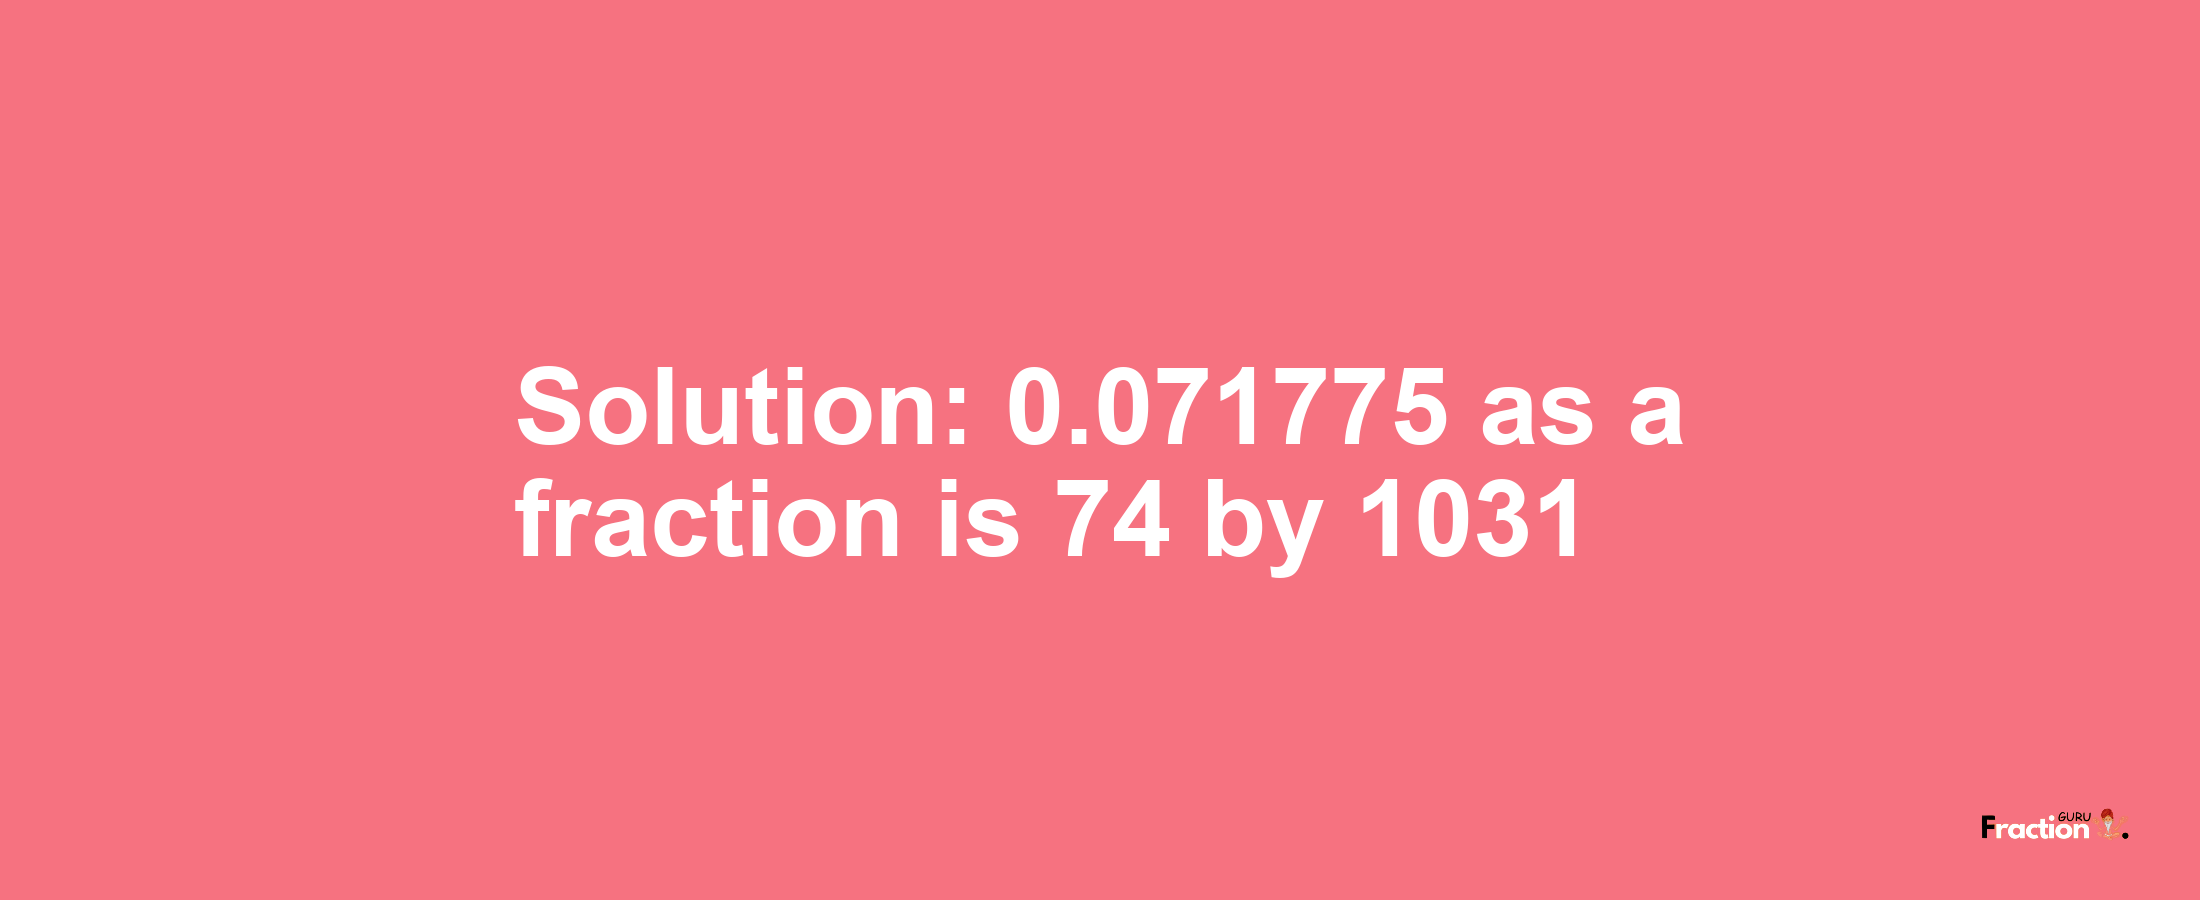 Solution:0.071775 as a fraction is 74/1031